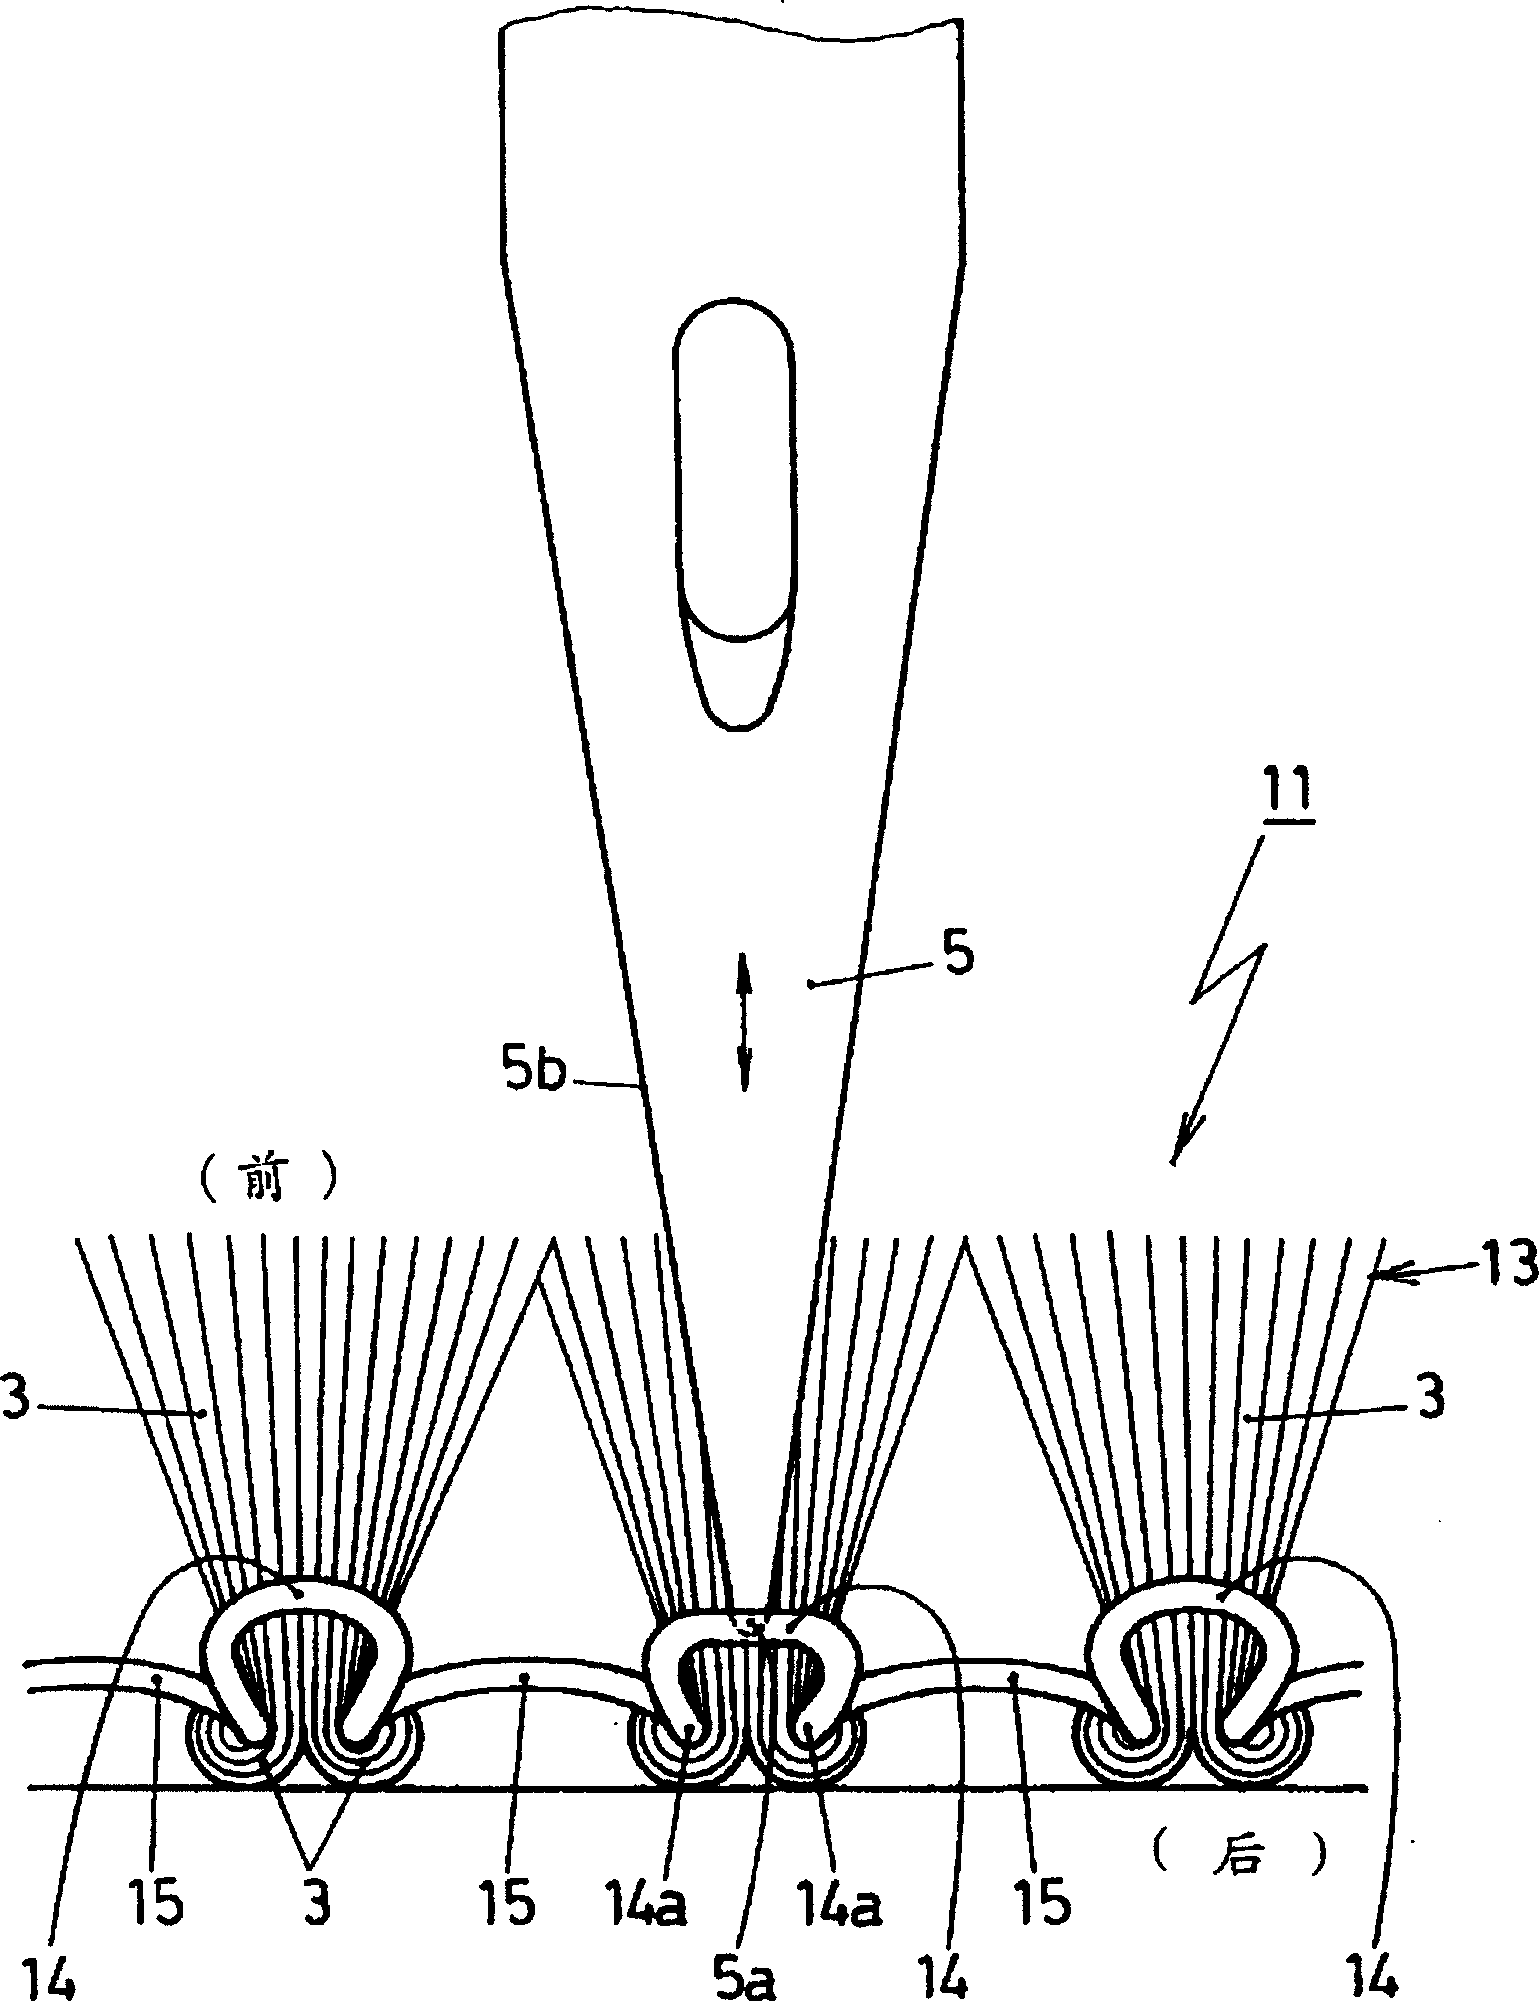 Terry knitting fabric, and its producing method and sewing method